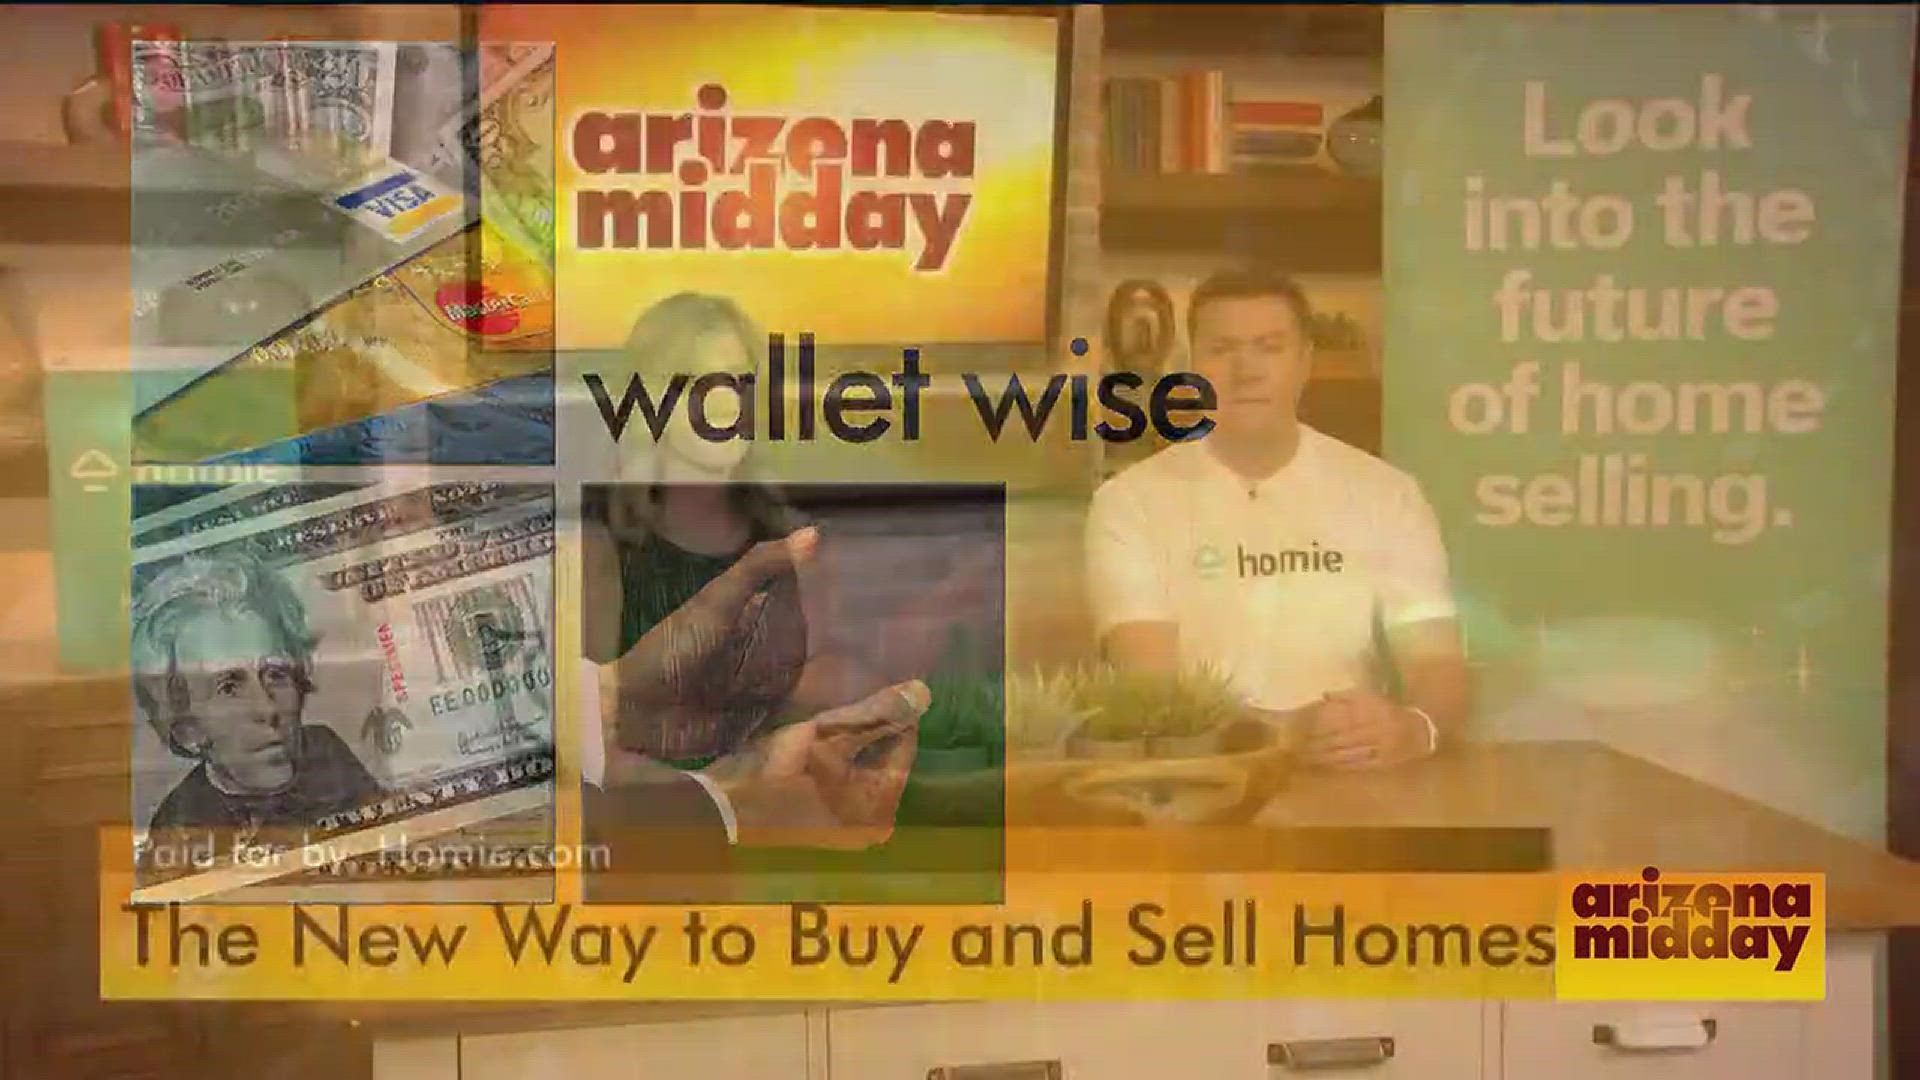 Johnny Hanna explains how Homie.com makes it easier to buy and sell a home, even saving you money.